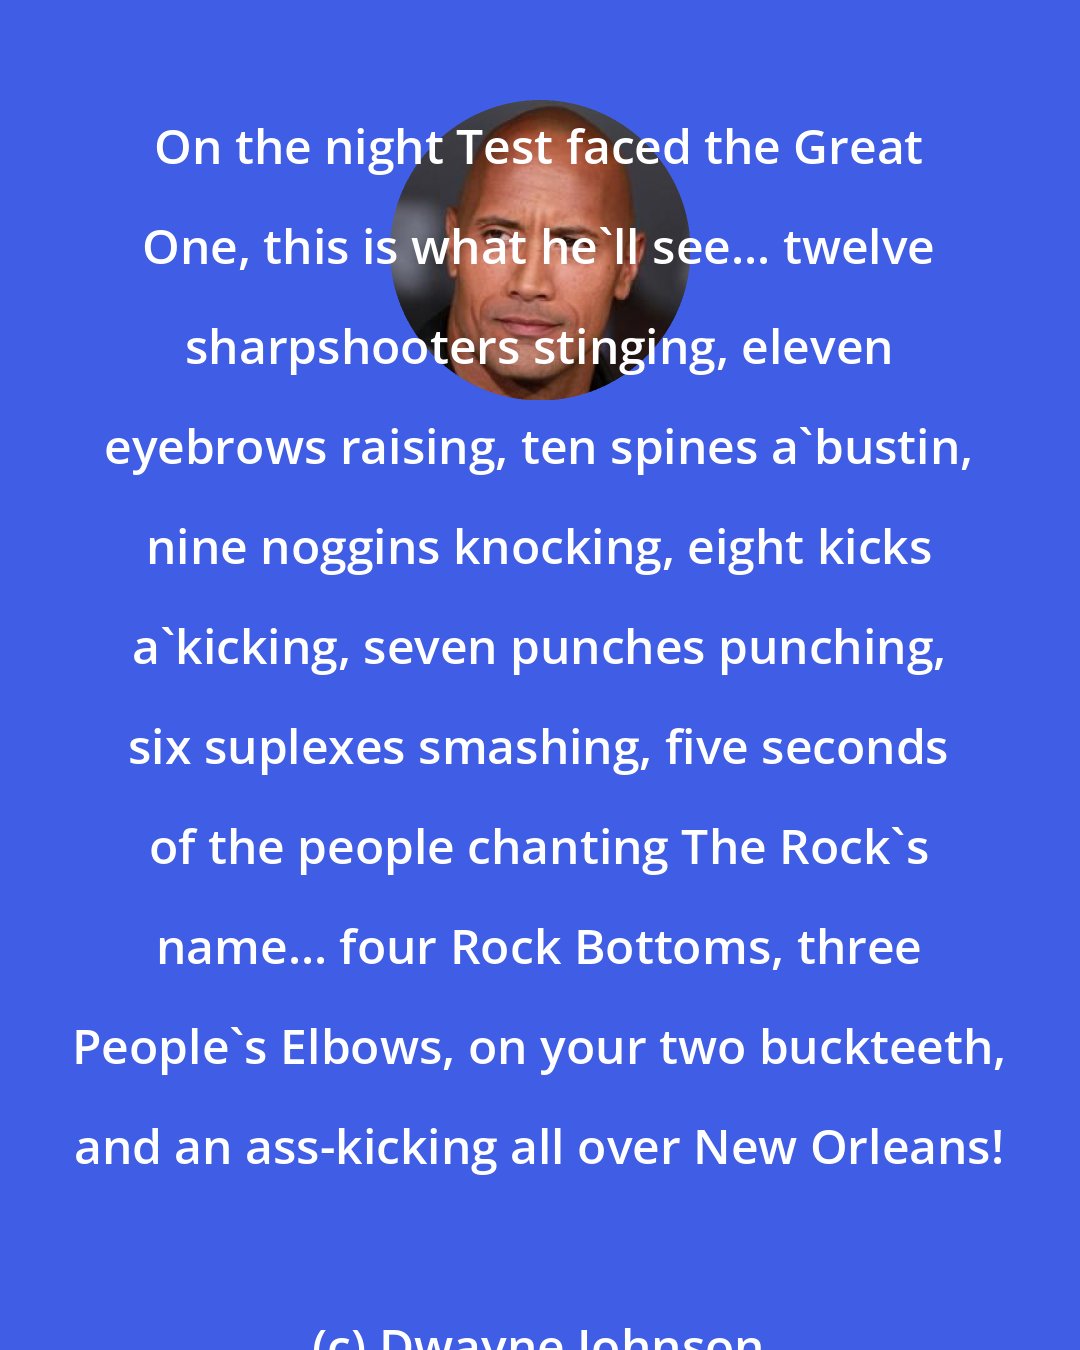 Dwayne Johnson: On the night Test faced the Great One, this is what he'll see... twelve sharpshooters stinging, eleven eyebrows raising, ten spines a'bustin, nine noggins knocking, eight kicks a'kicking, seven punches punching, six suplexes smashing, five seconds of the people chanting The Rock's name... four Rock Bottoms, three People's Elbows, on your two buckteeth, and an ass-kicking all over New Orleans!